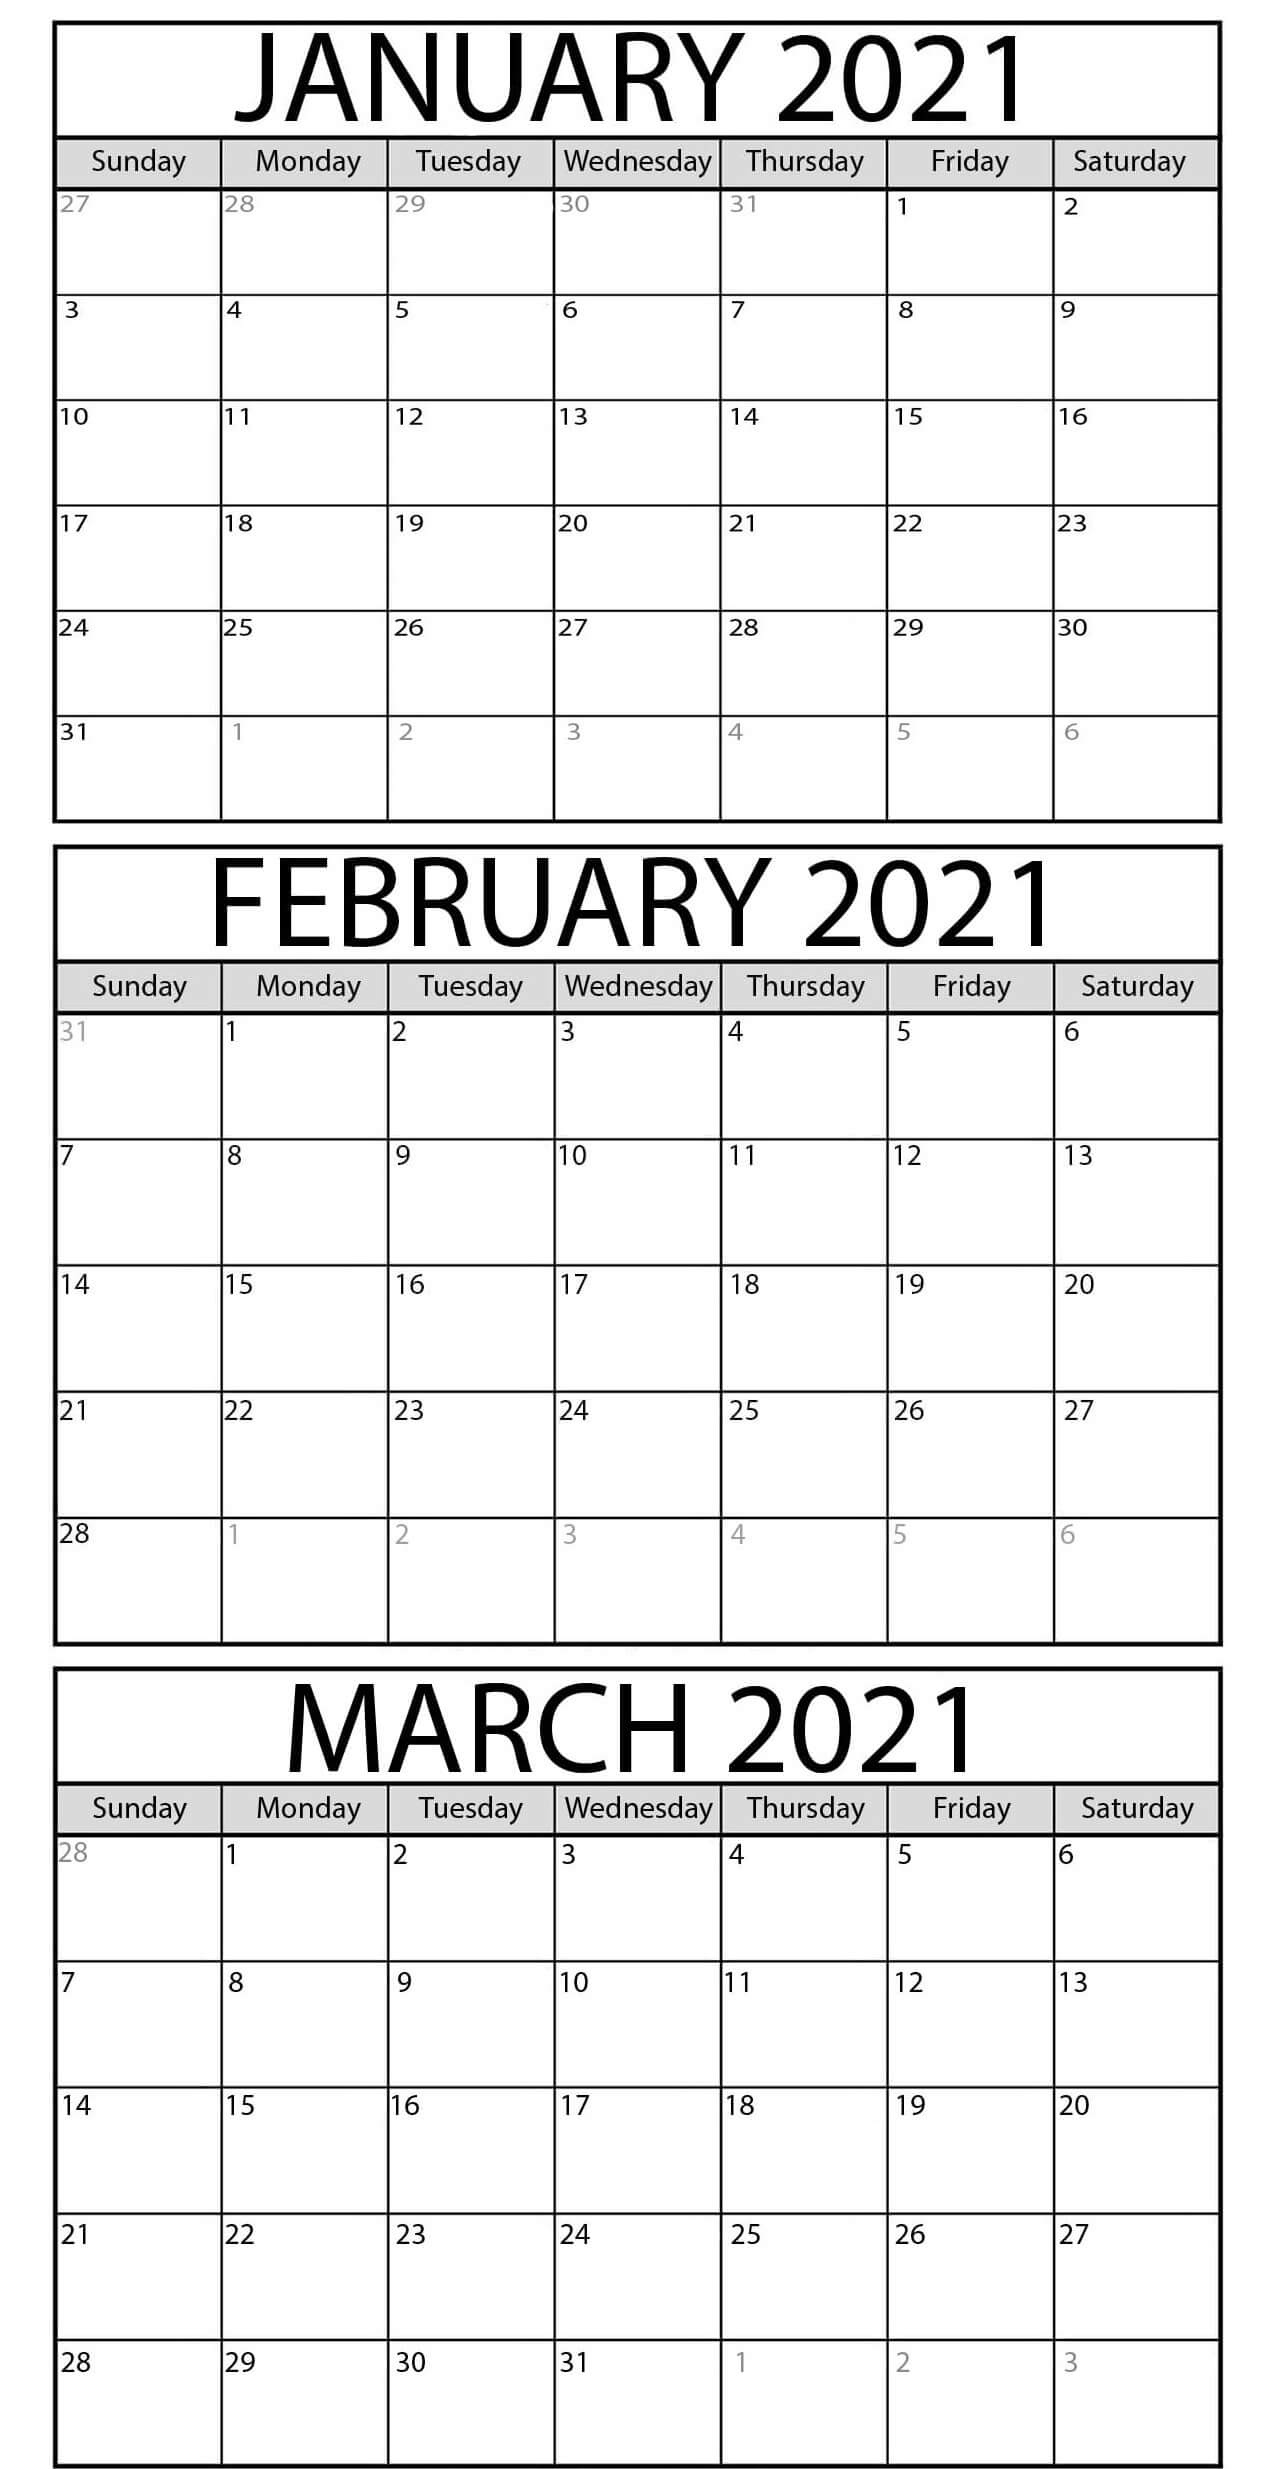 Free January To June 2021 Calendar Template With Notes - Web Galaxy Coder Free January To June Daily Calendar 2021 June